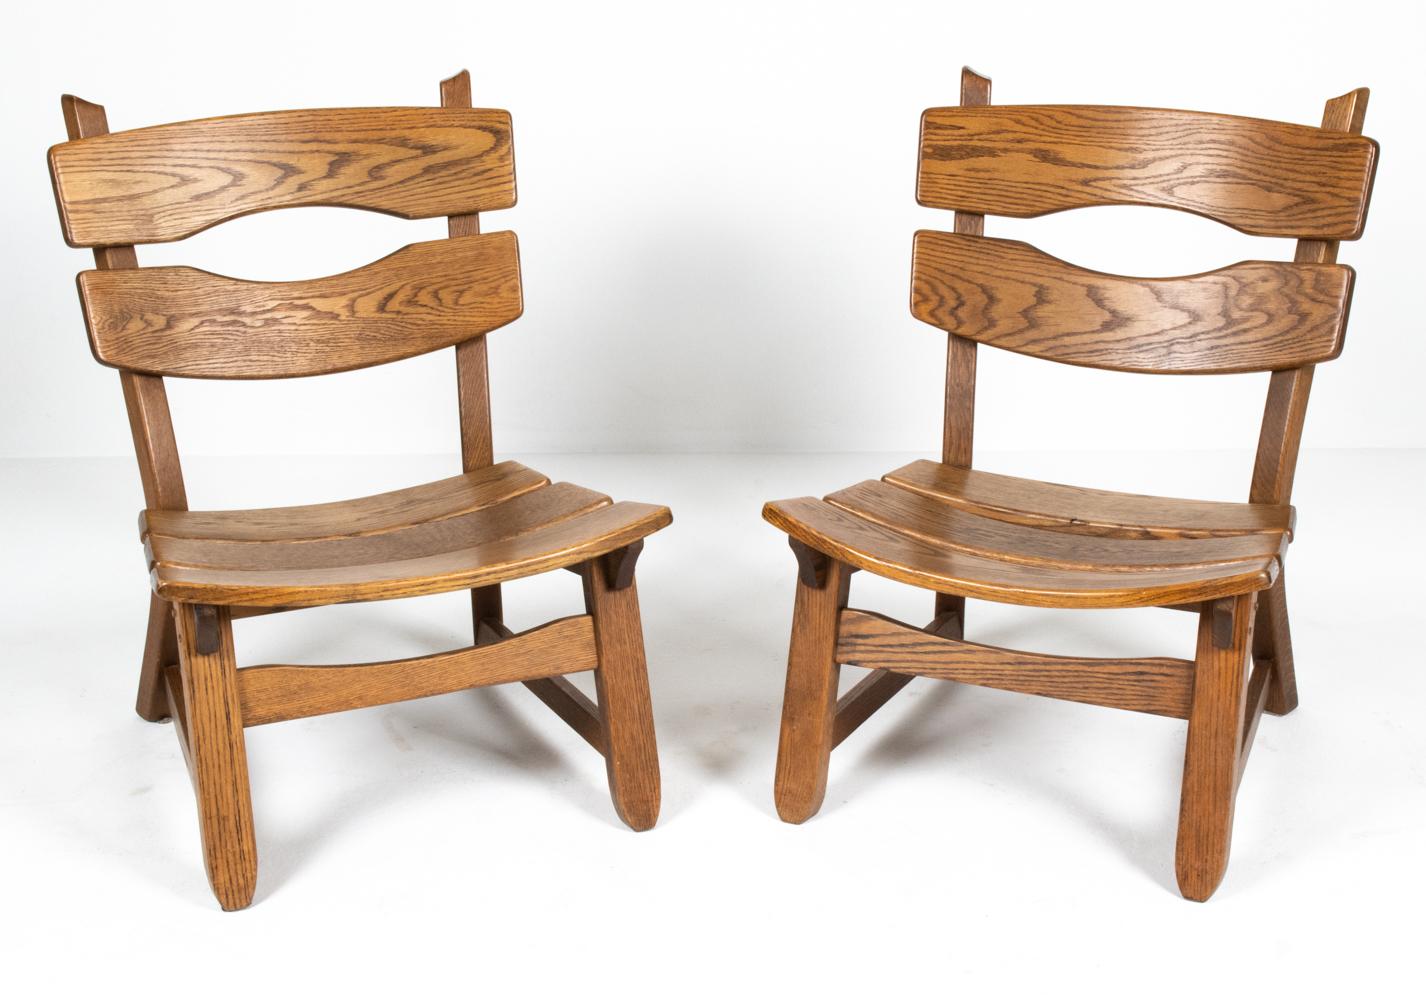 Pair of Brutalist solid oak lounge chairs by Dittmann & Co for AWA Radbound, Netherlands, c. 1970's. These substantial armless lounge chairs feature all wood construction in a dark stained oak with curved and rounded sculptural slatted seat and